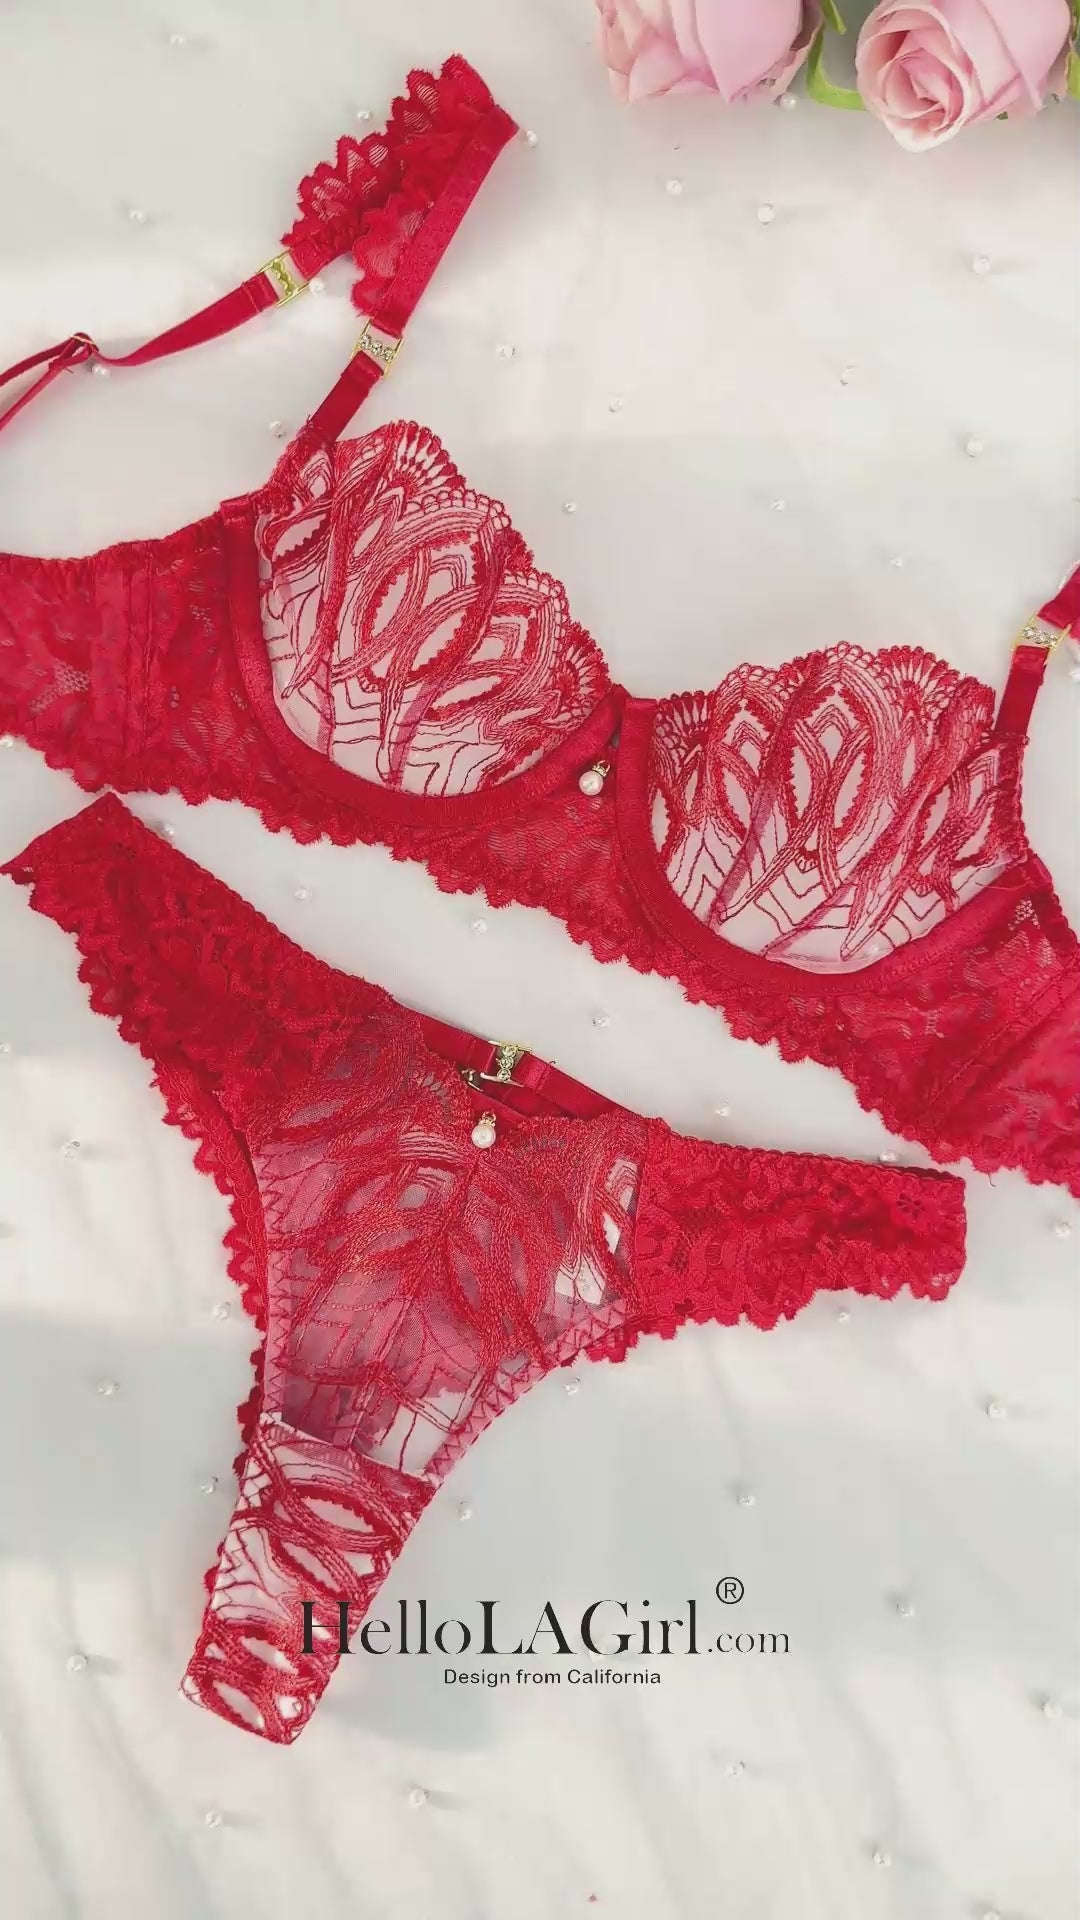 Eye-catching Red Embroidered Small Pearl Lingerie Set